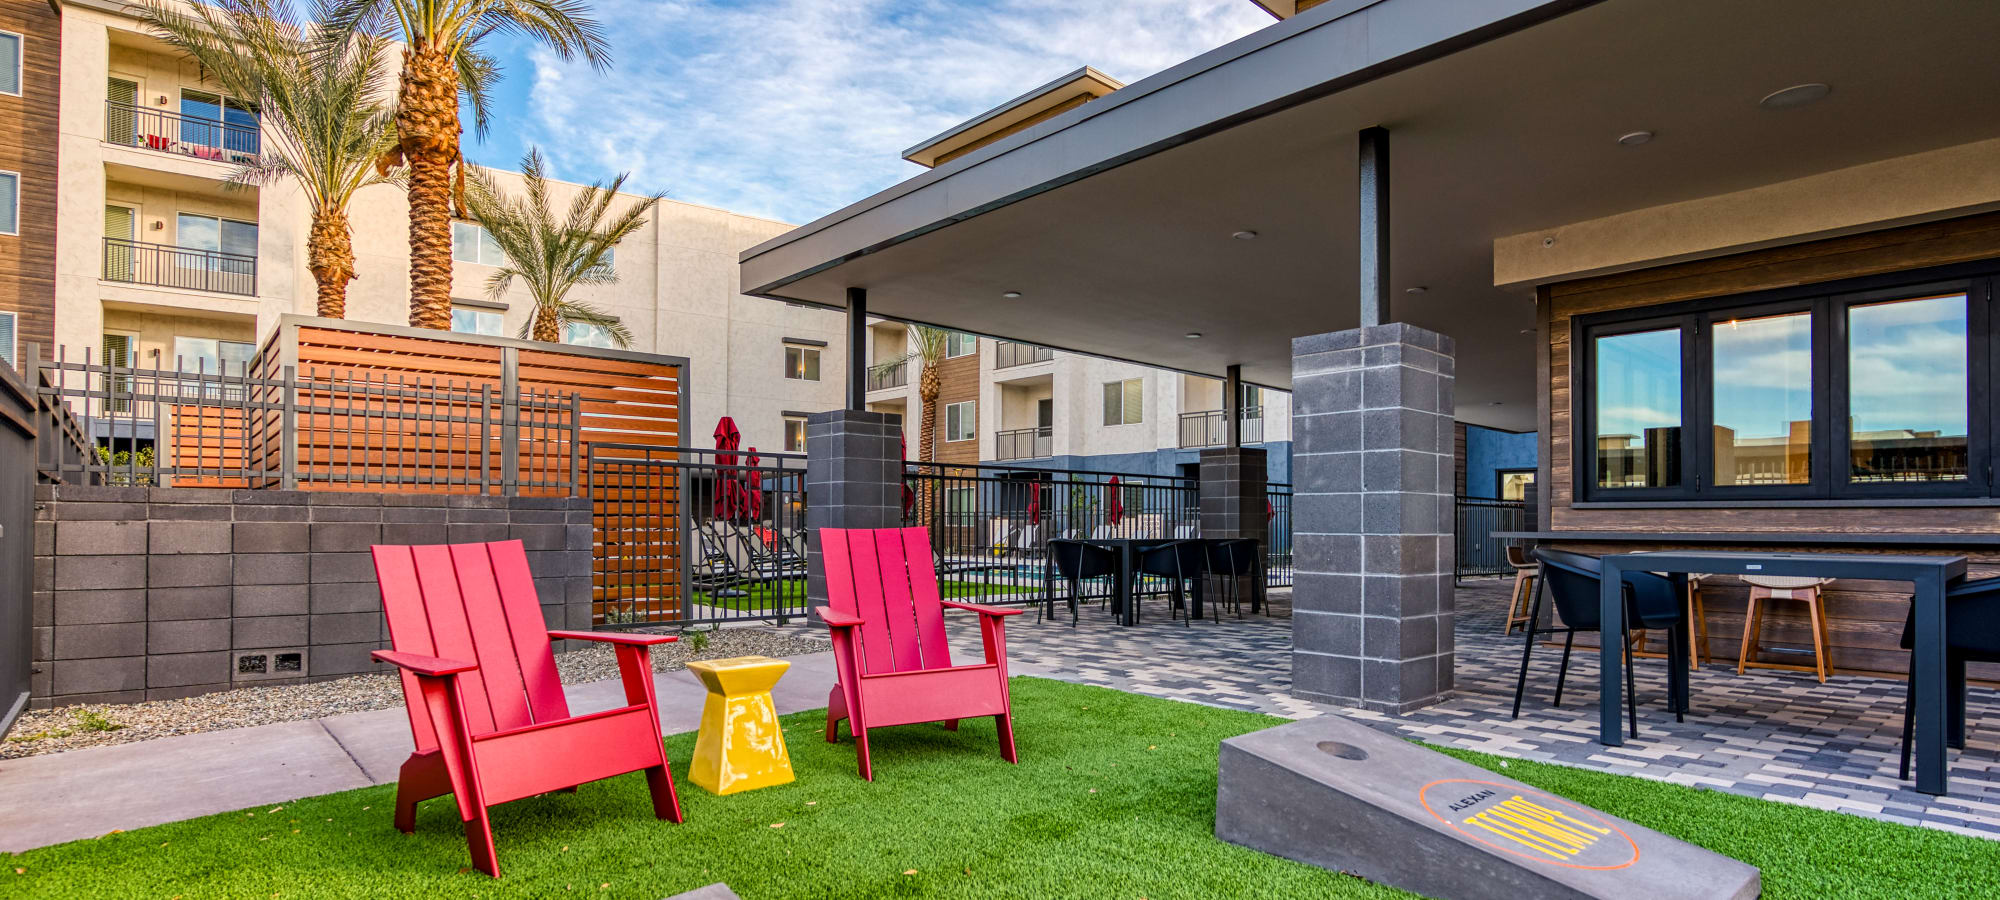 Lounge chair and corn hole at Alexan Tempe in Tempe, Arizona